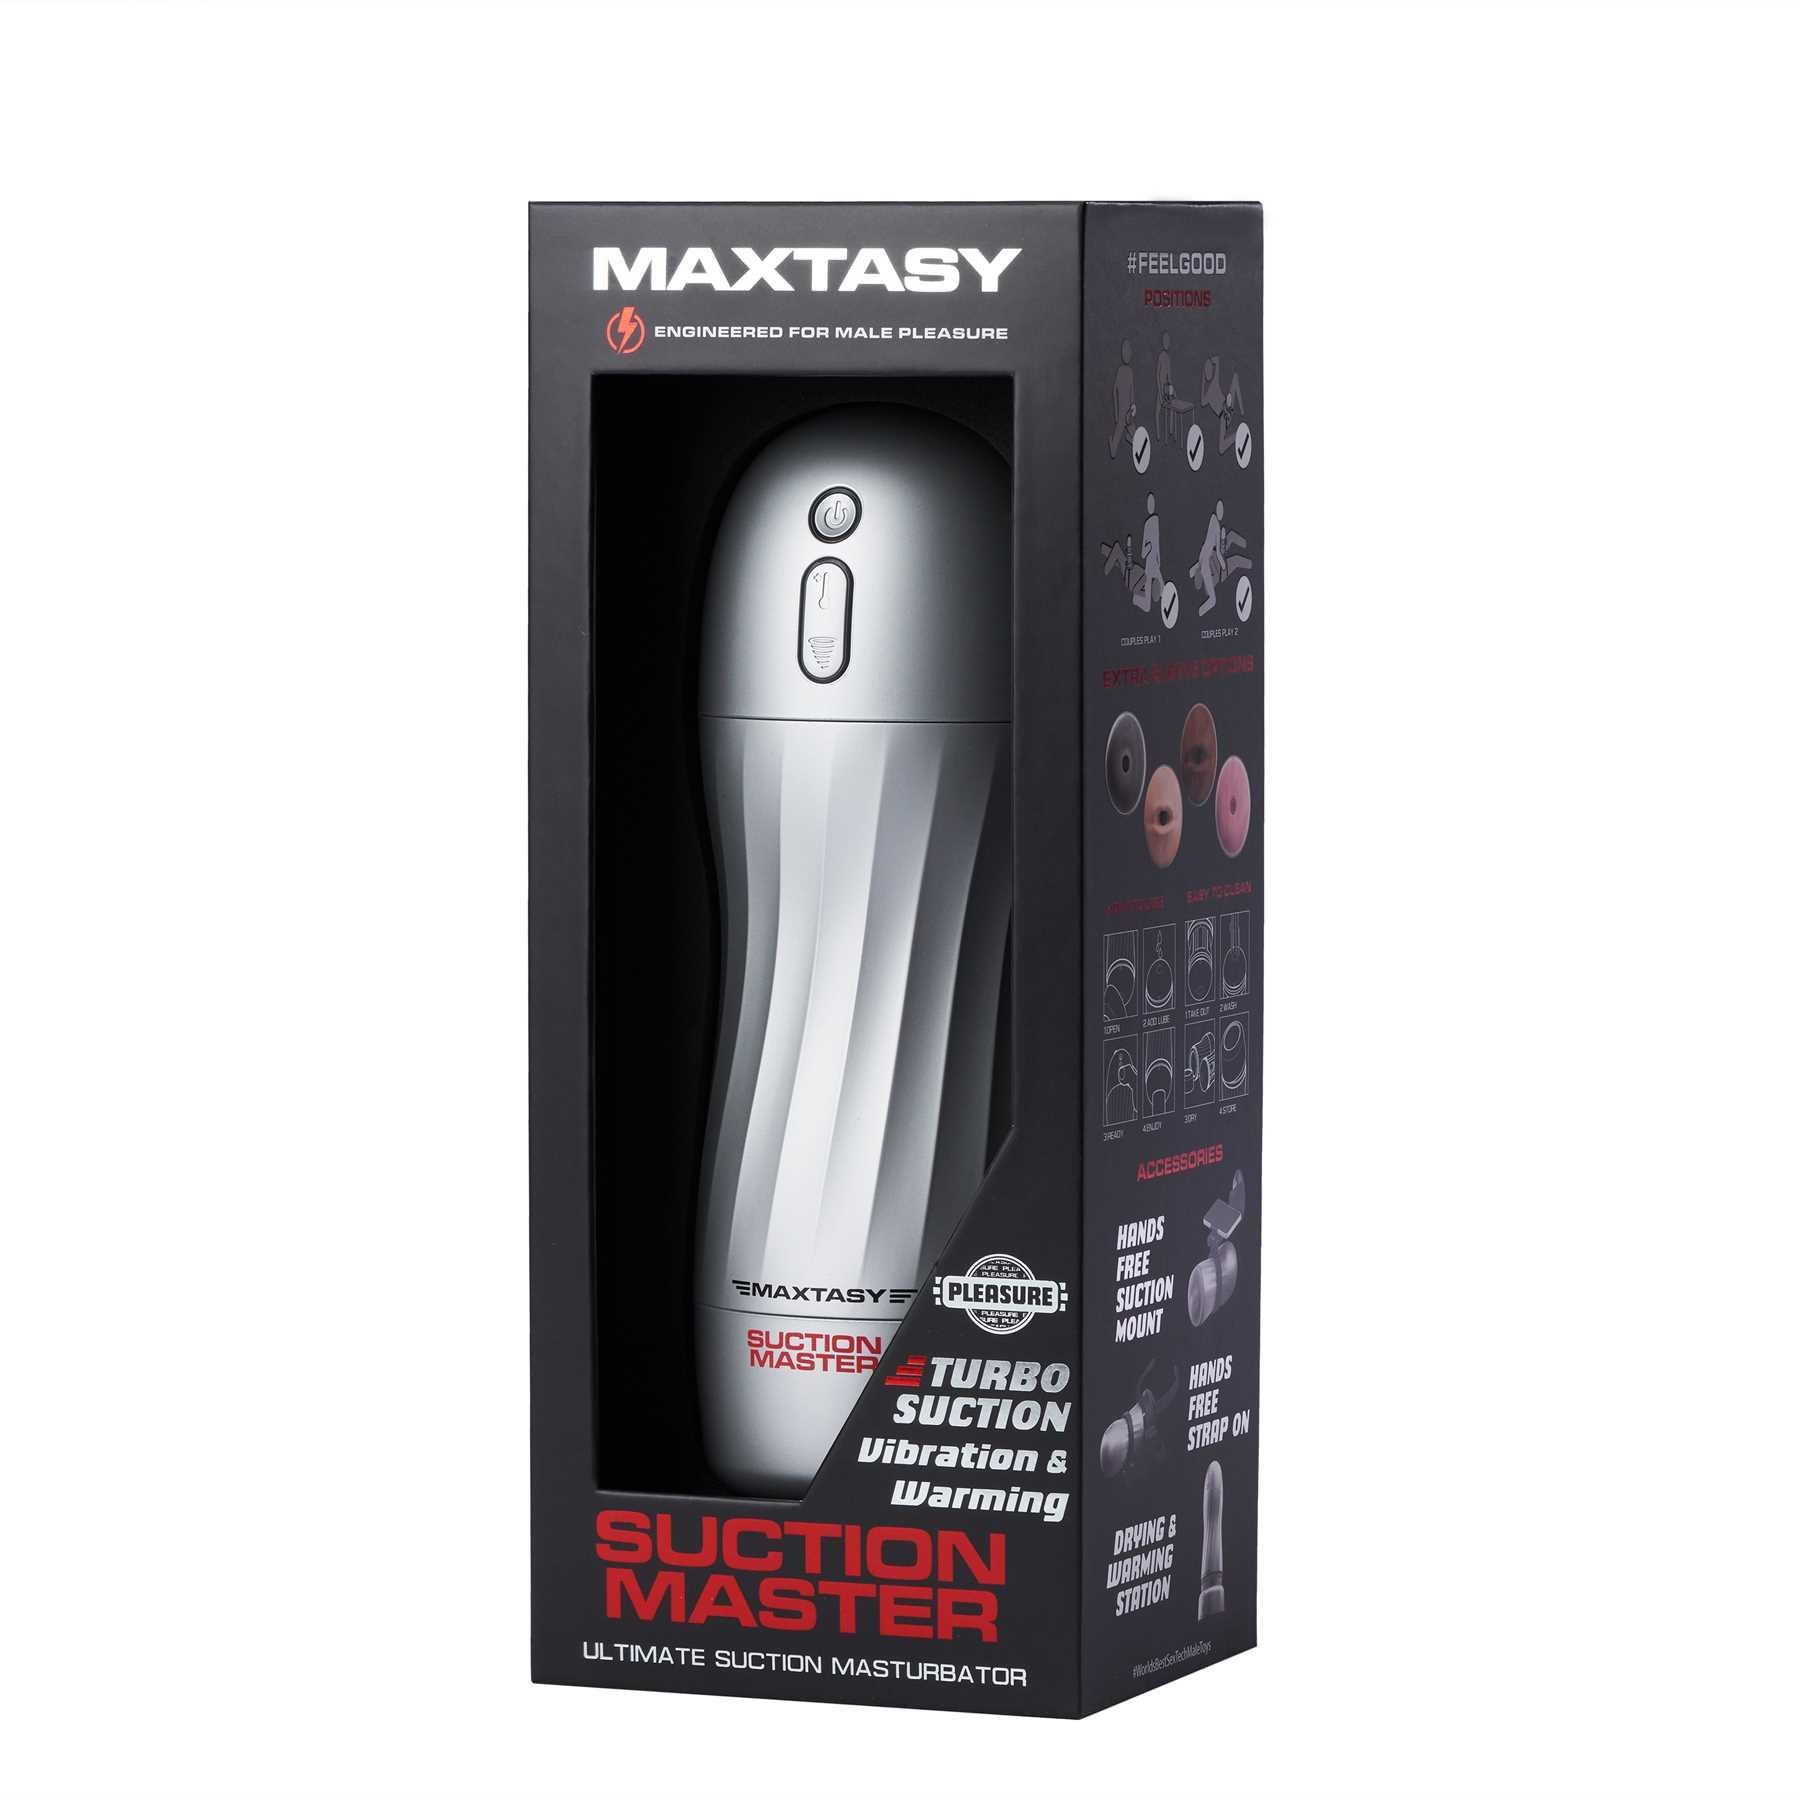 Maxtasy Suction Master Stroker - Realistic Nude Mouth box